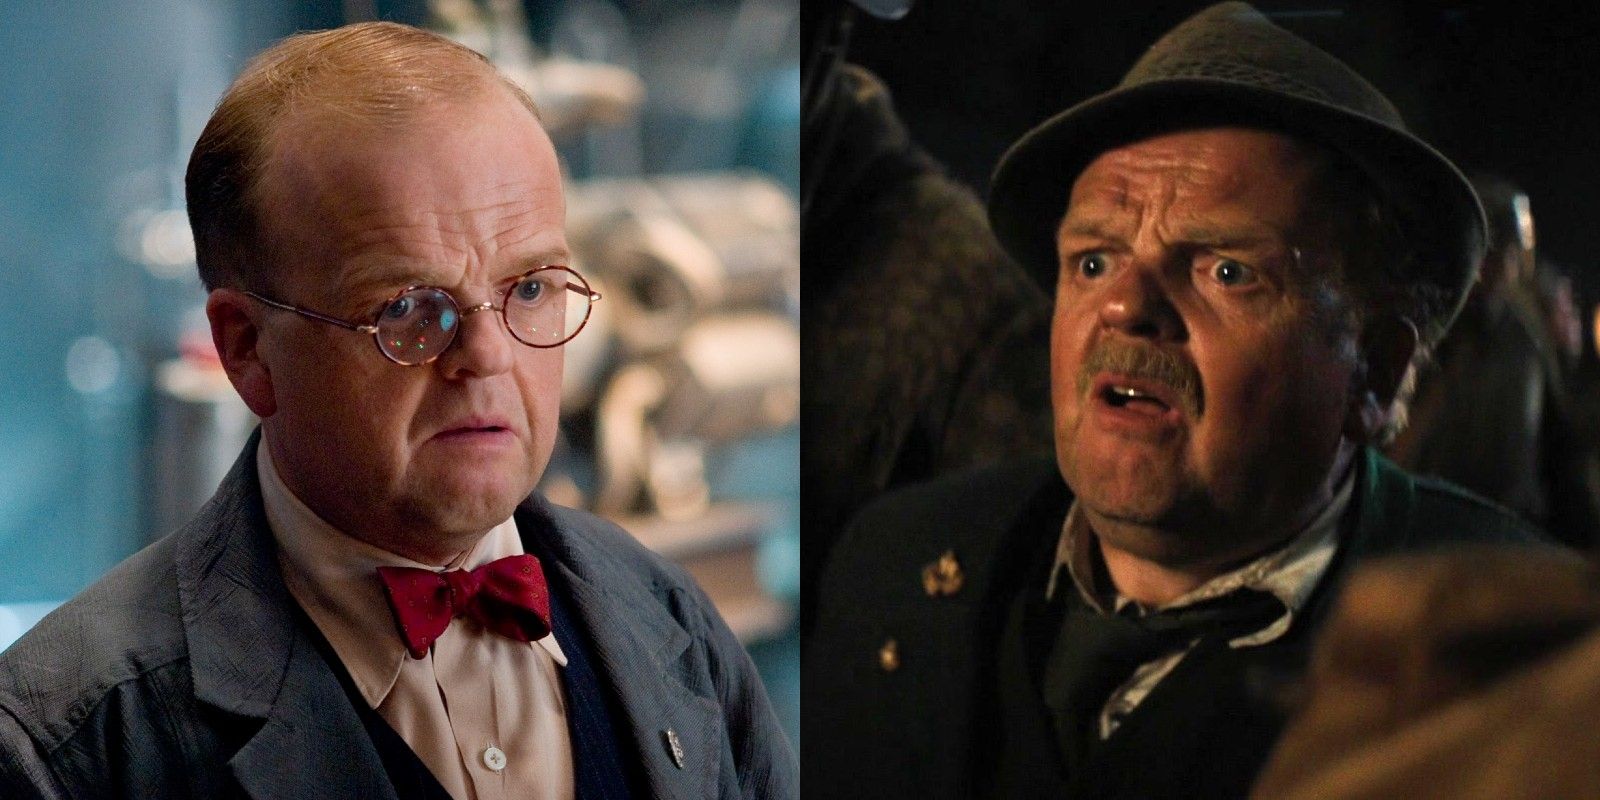 Toby Jones as Arnim Zola in Captain America: The First Avenger and Basil Shaw in Indiana Jones and the Dial of Destiny